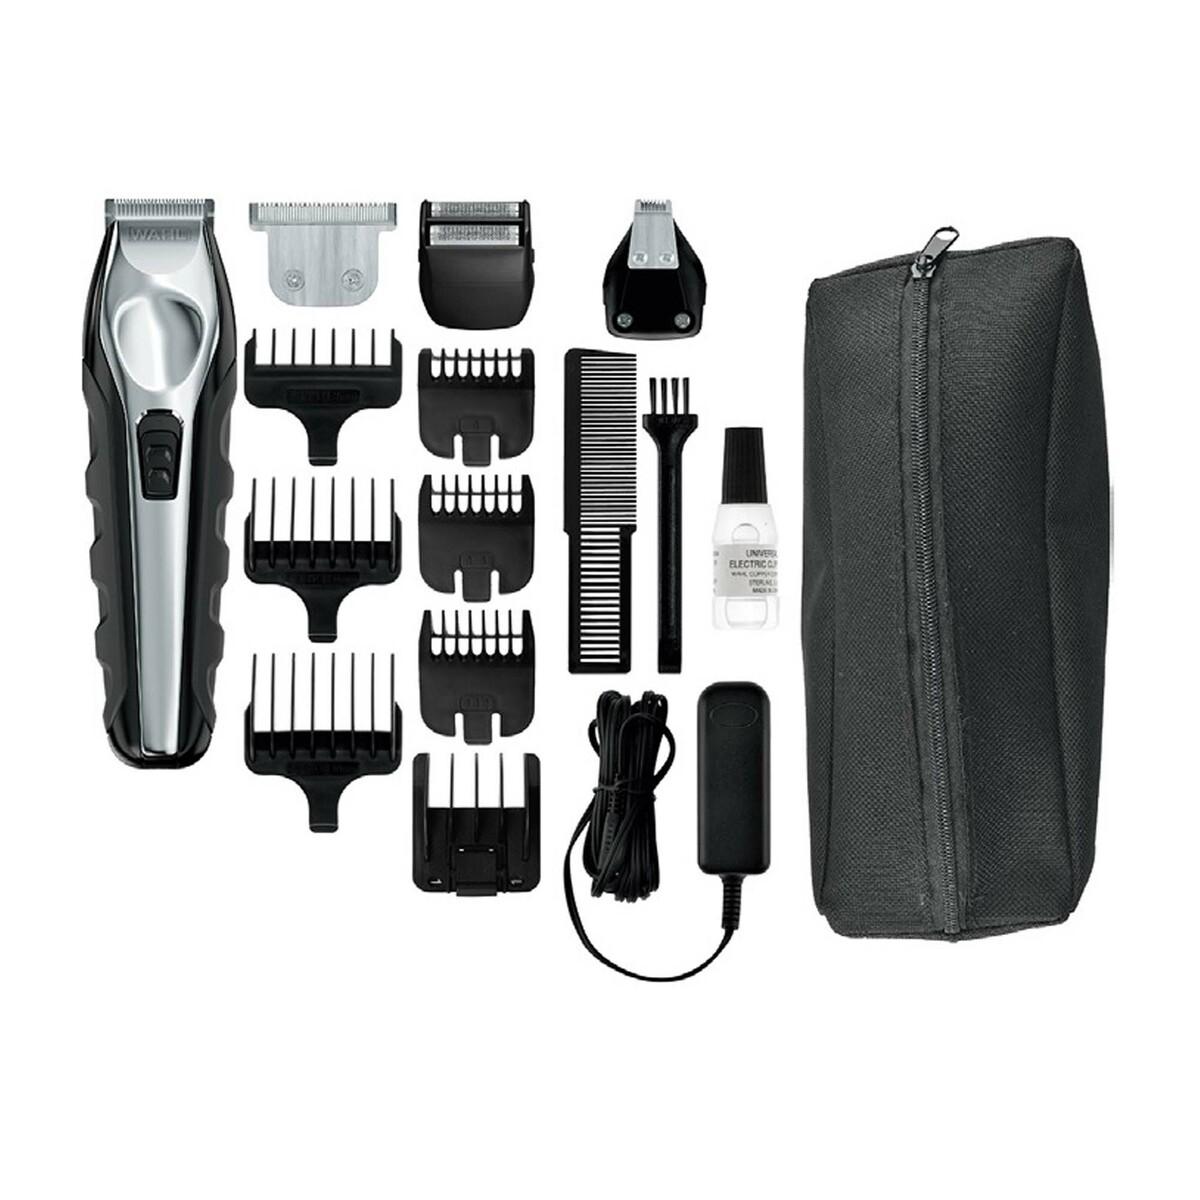 Wahl All in One Lithium Ion Sport Ergo Grooming Kit 9888-1227